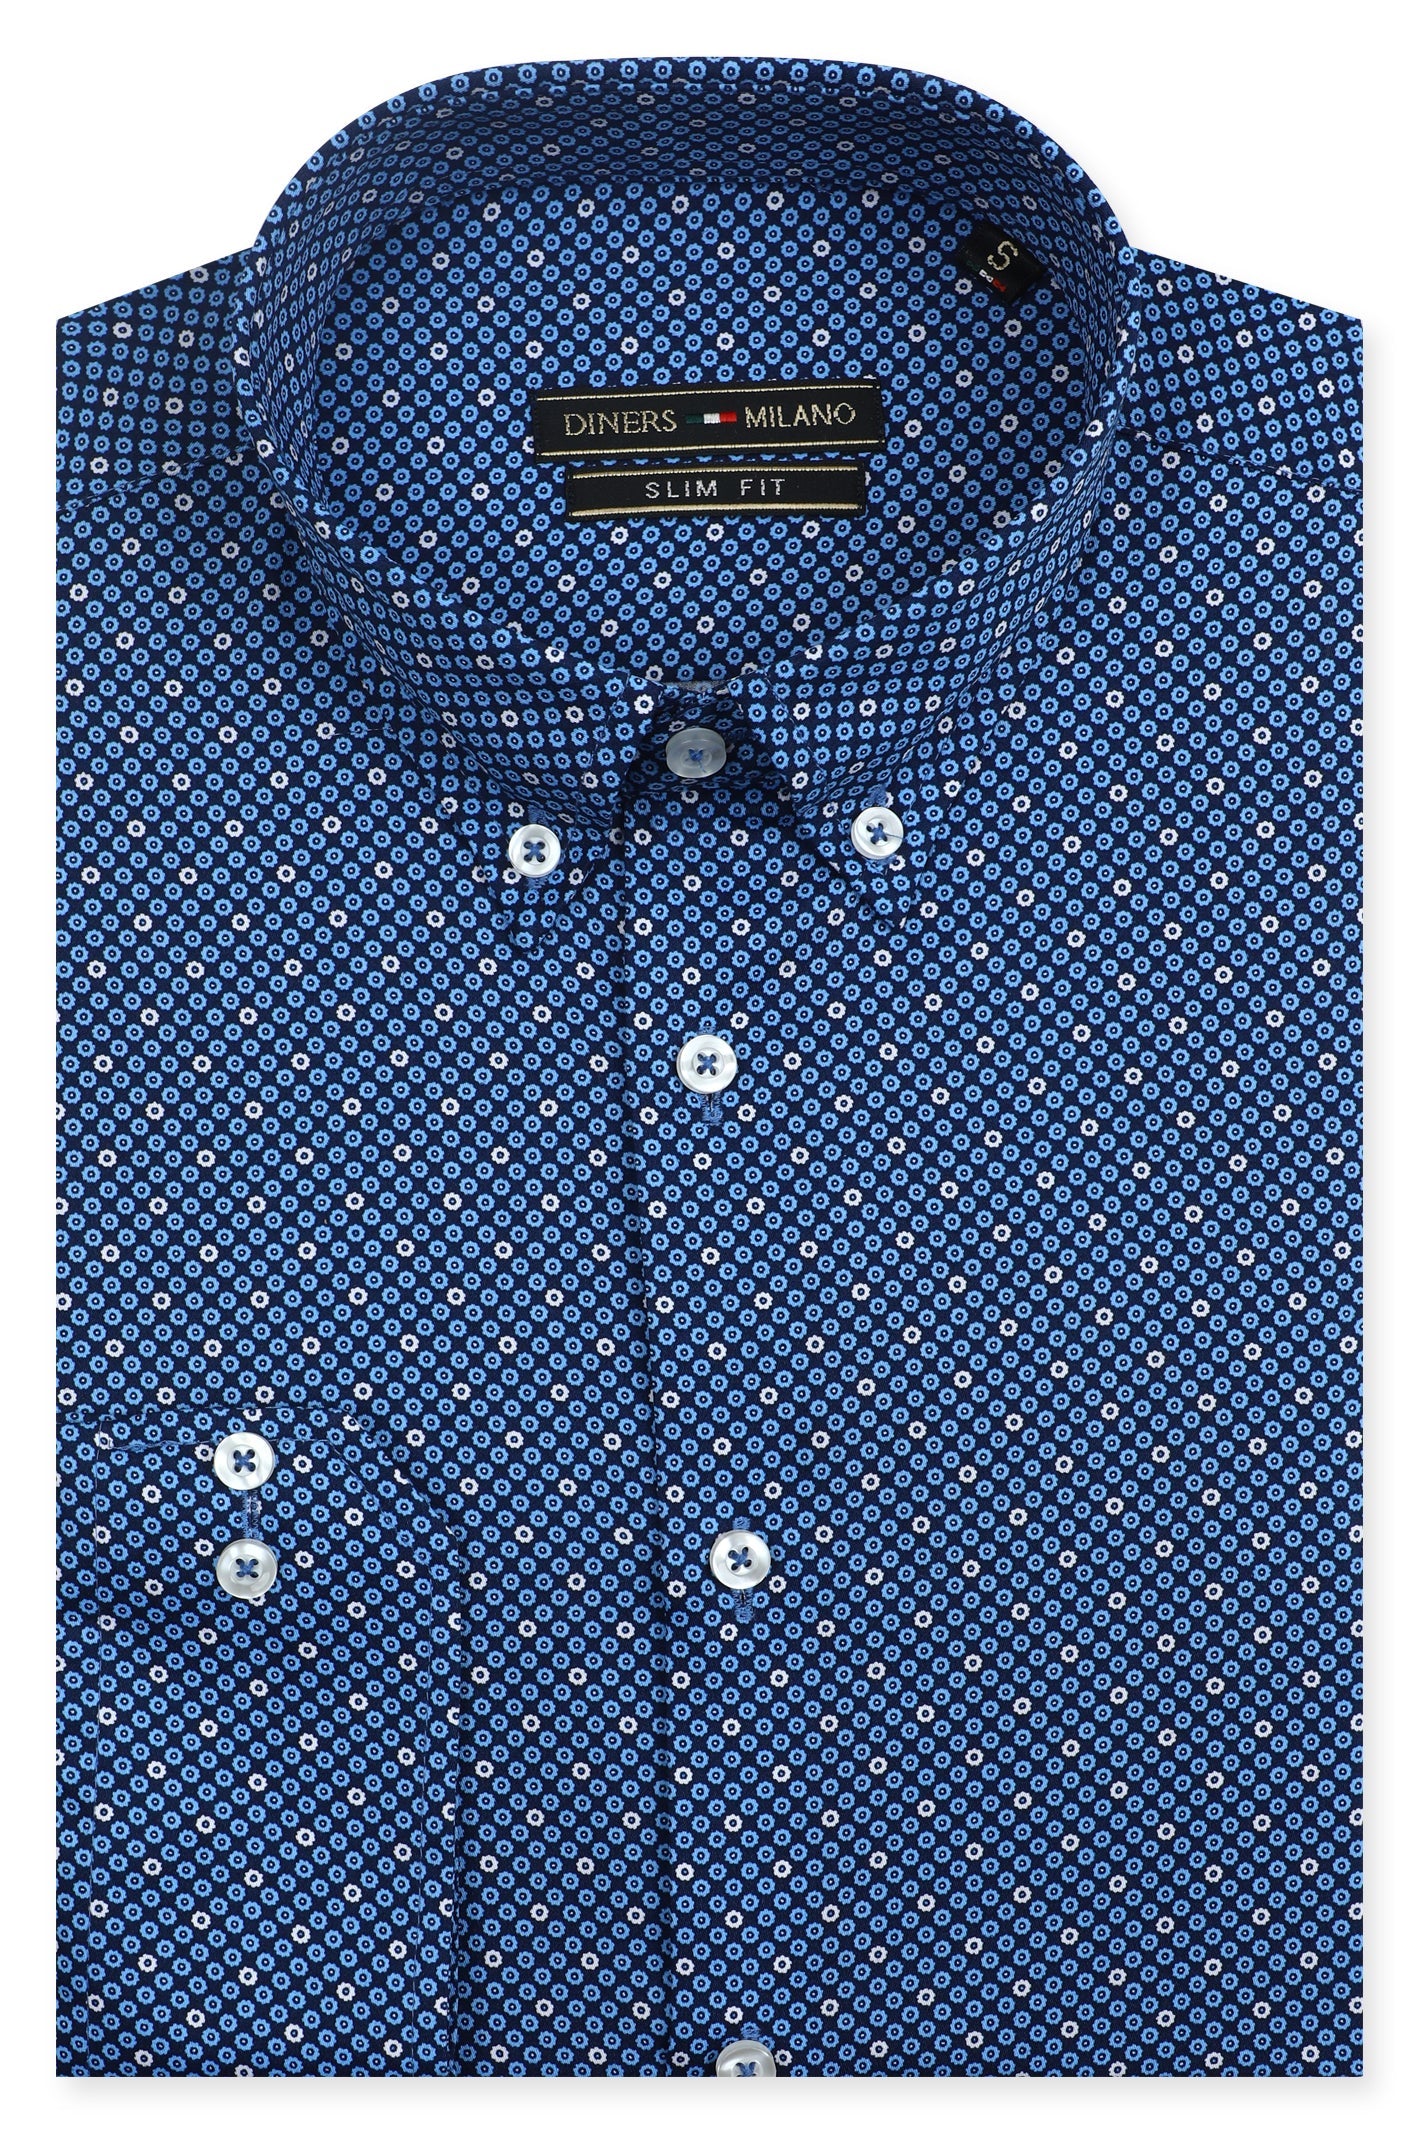 Casual Milano Shirt in Blue SKU: AM24537-BLUE - Diners